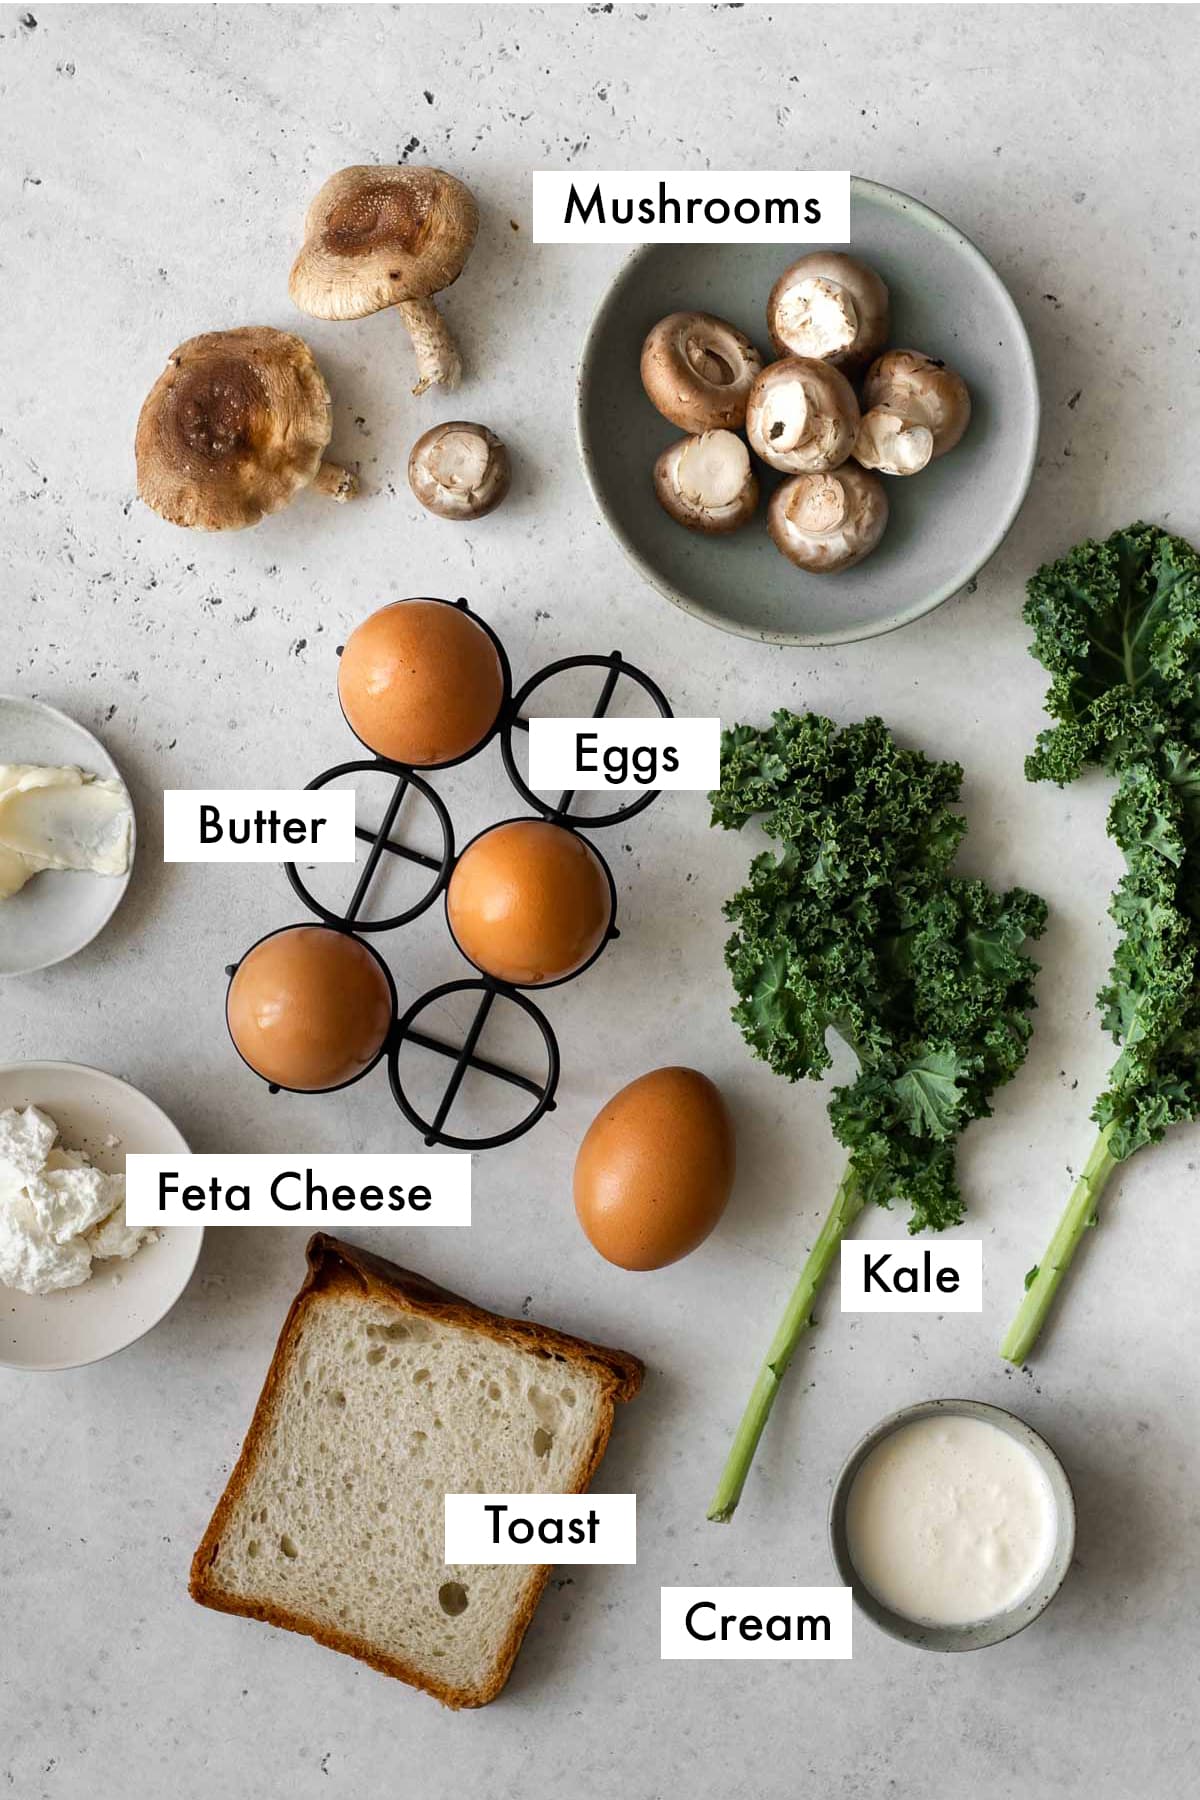 ingredients for coddled eggs with mushroom and kale on a table labelled with text graphics.